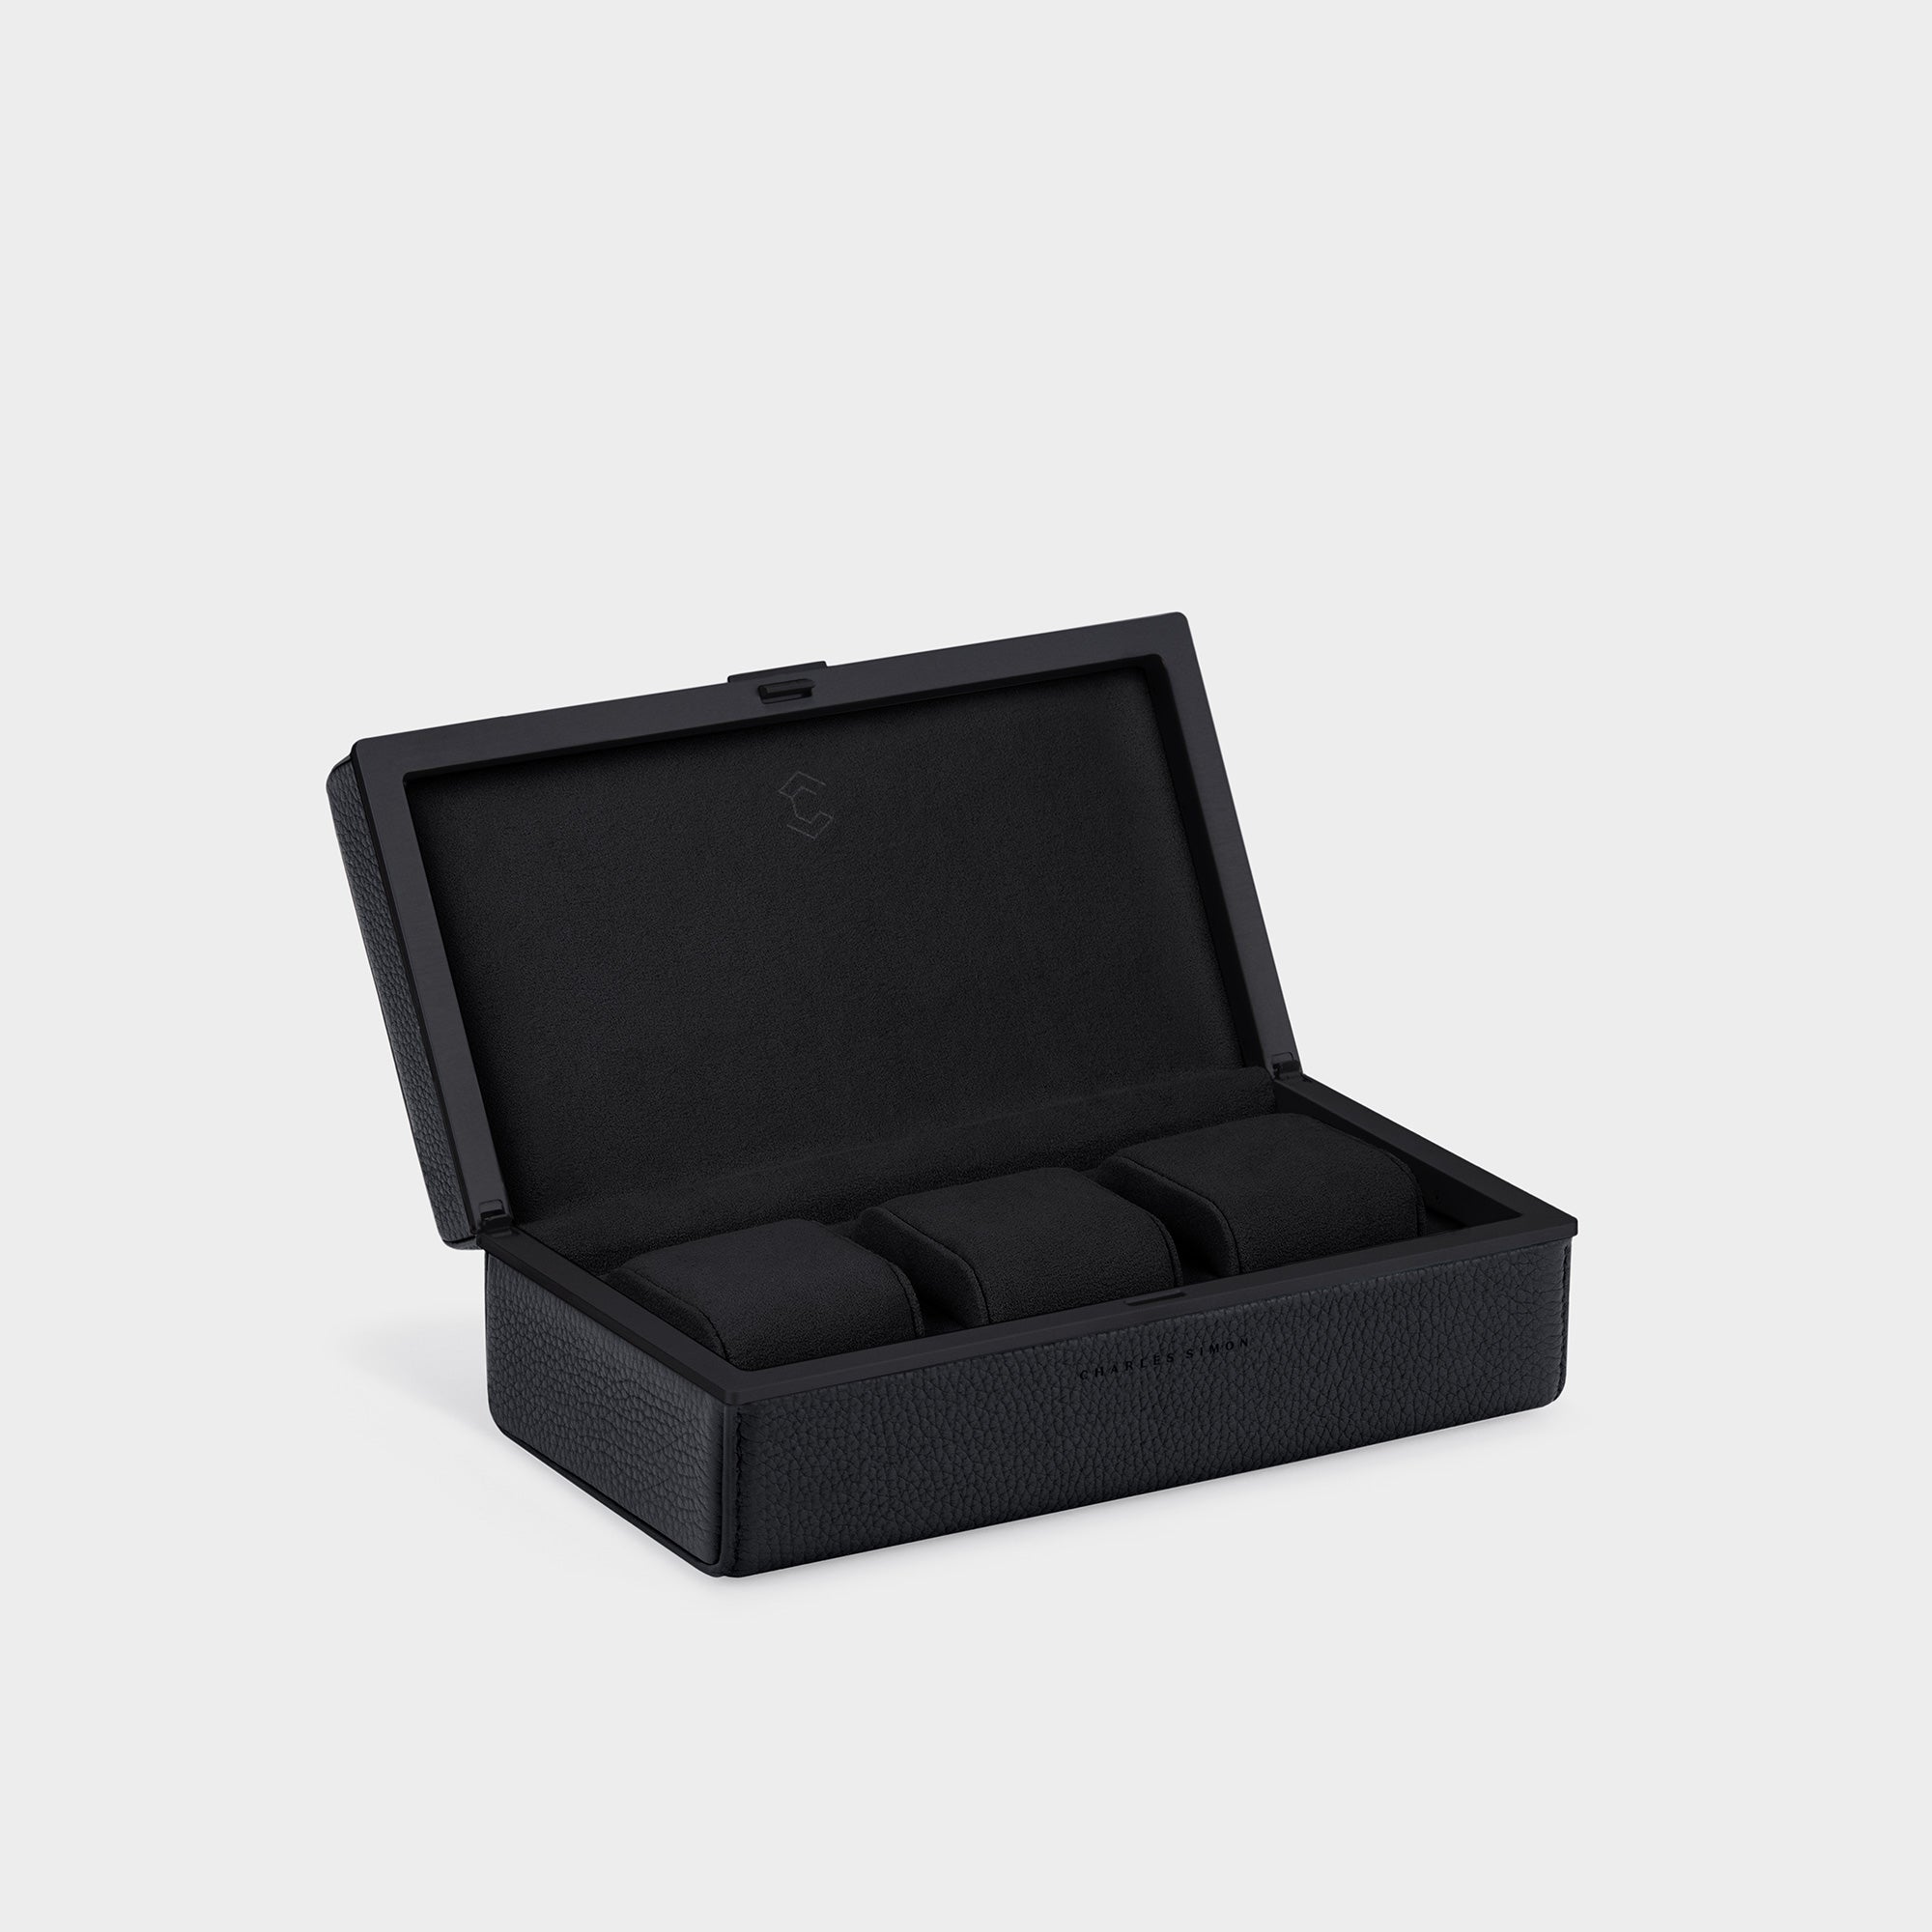 Charles Simon Eaton 3 watch case in all black leather, anodized aluminum and Alcantara